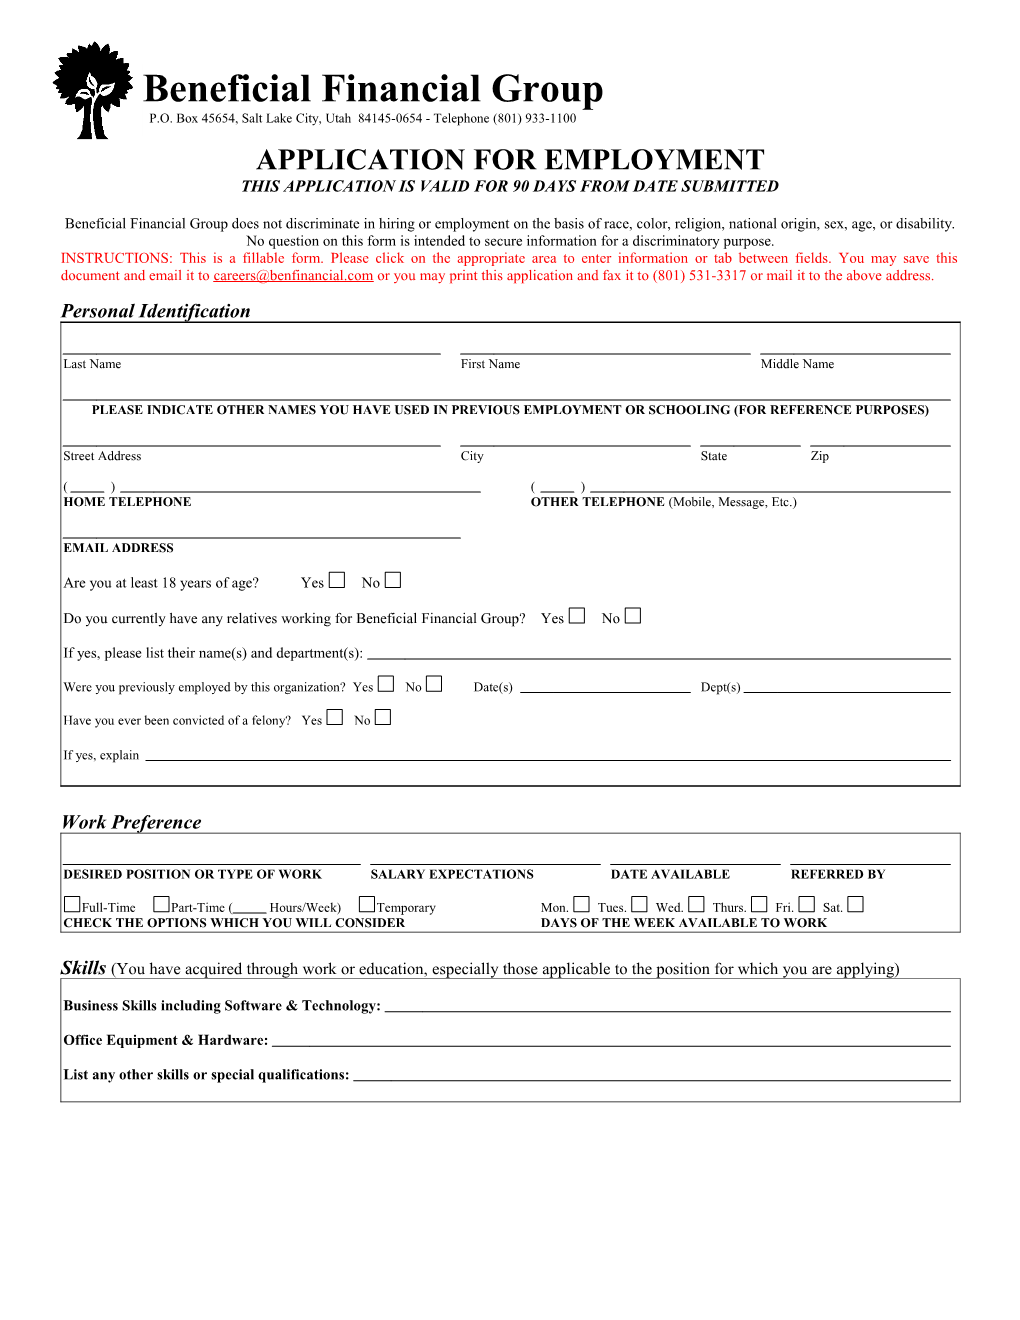 Application for Employment s107